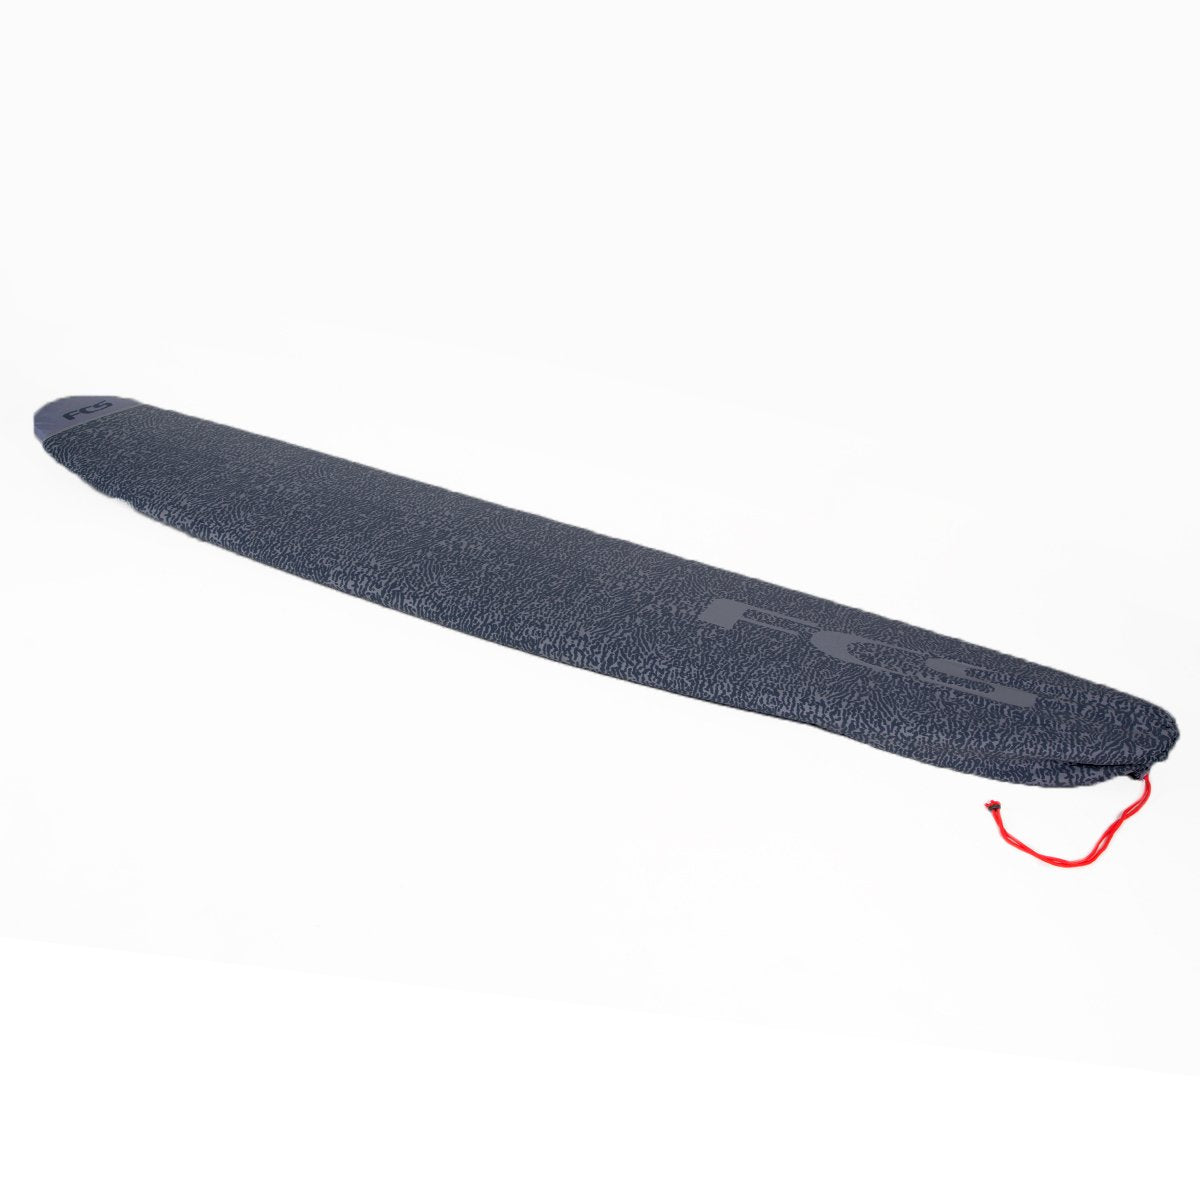 FCS USA: Surfboard Fins, Covers, Traction, Leashes, Surf Accessories